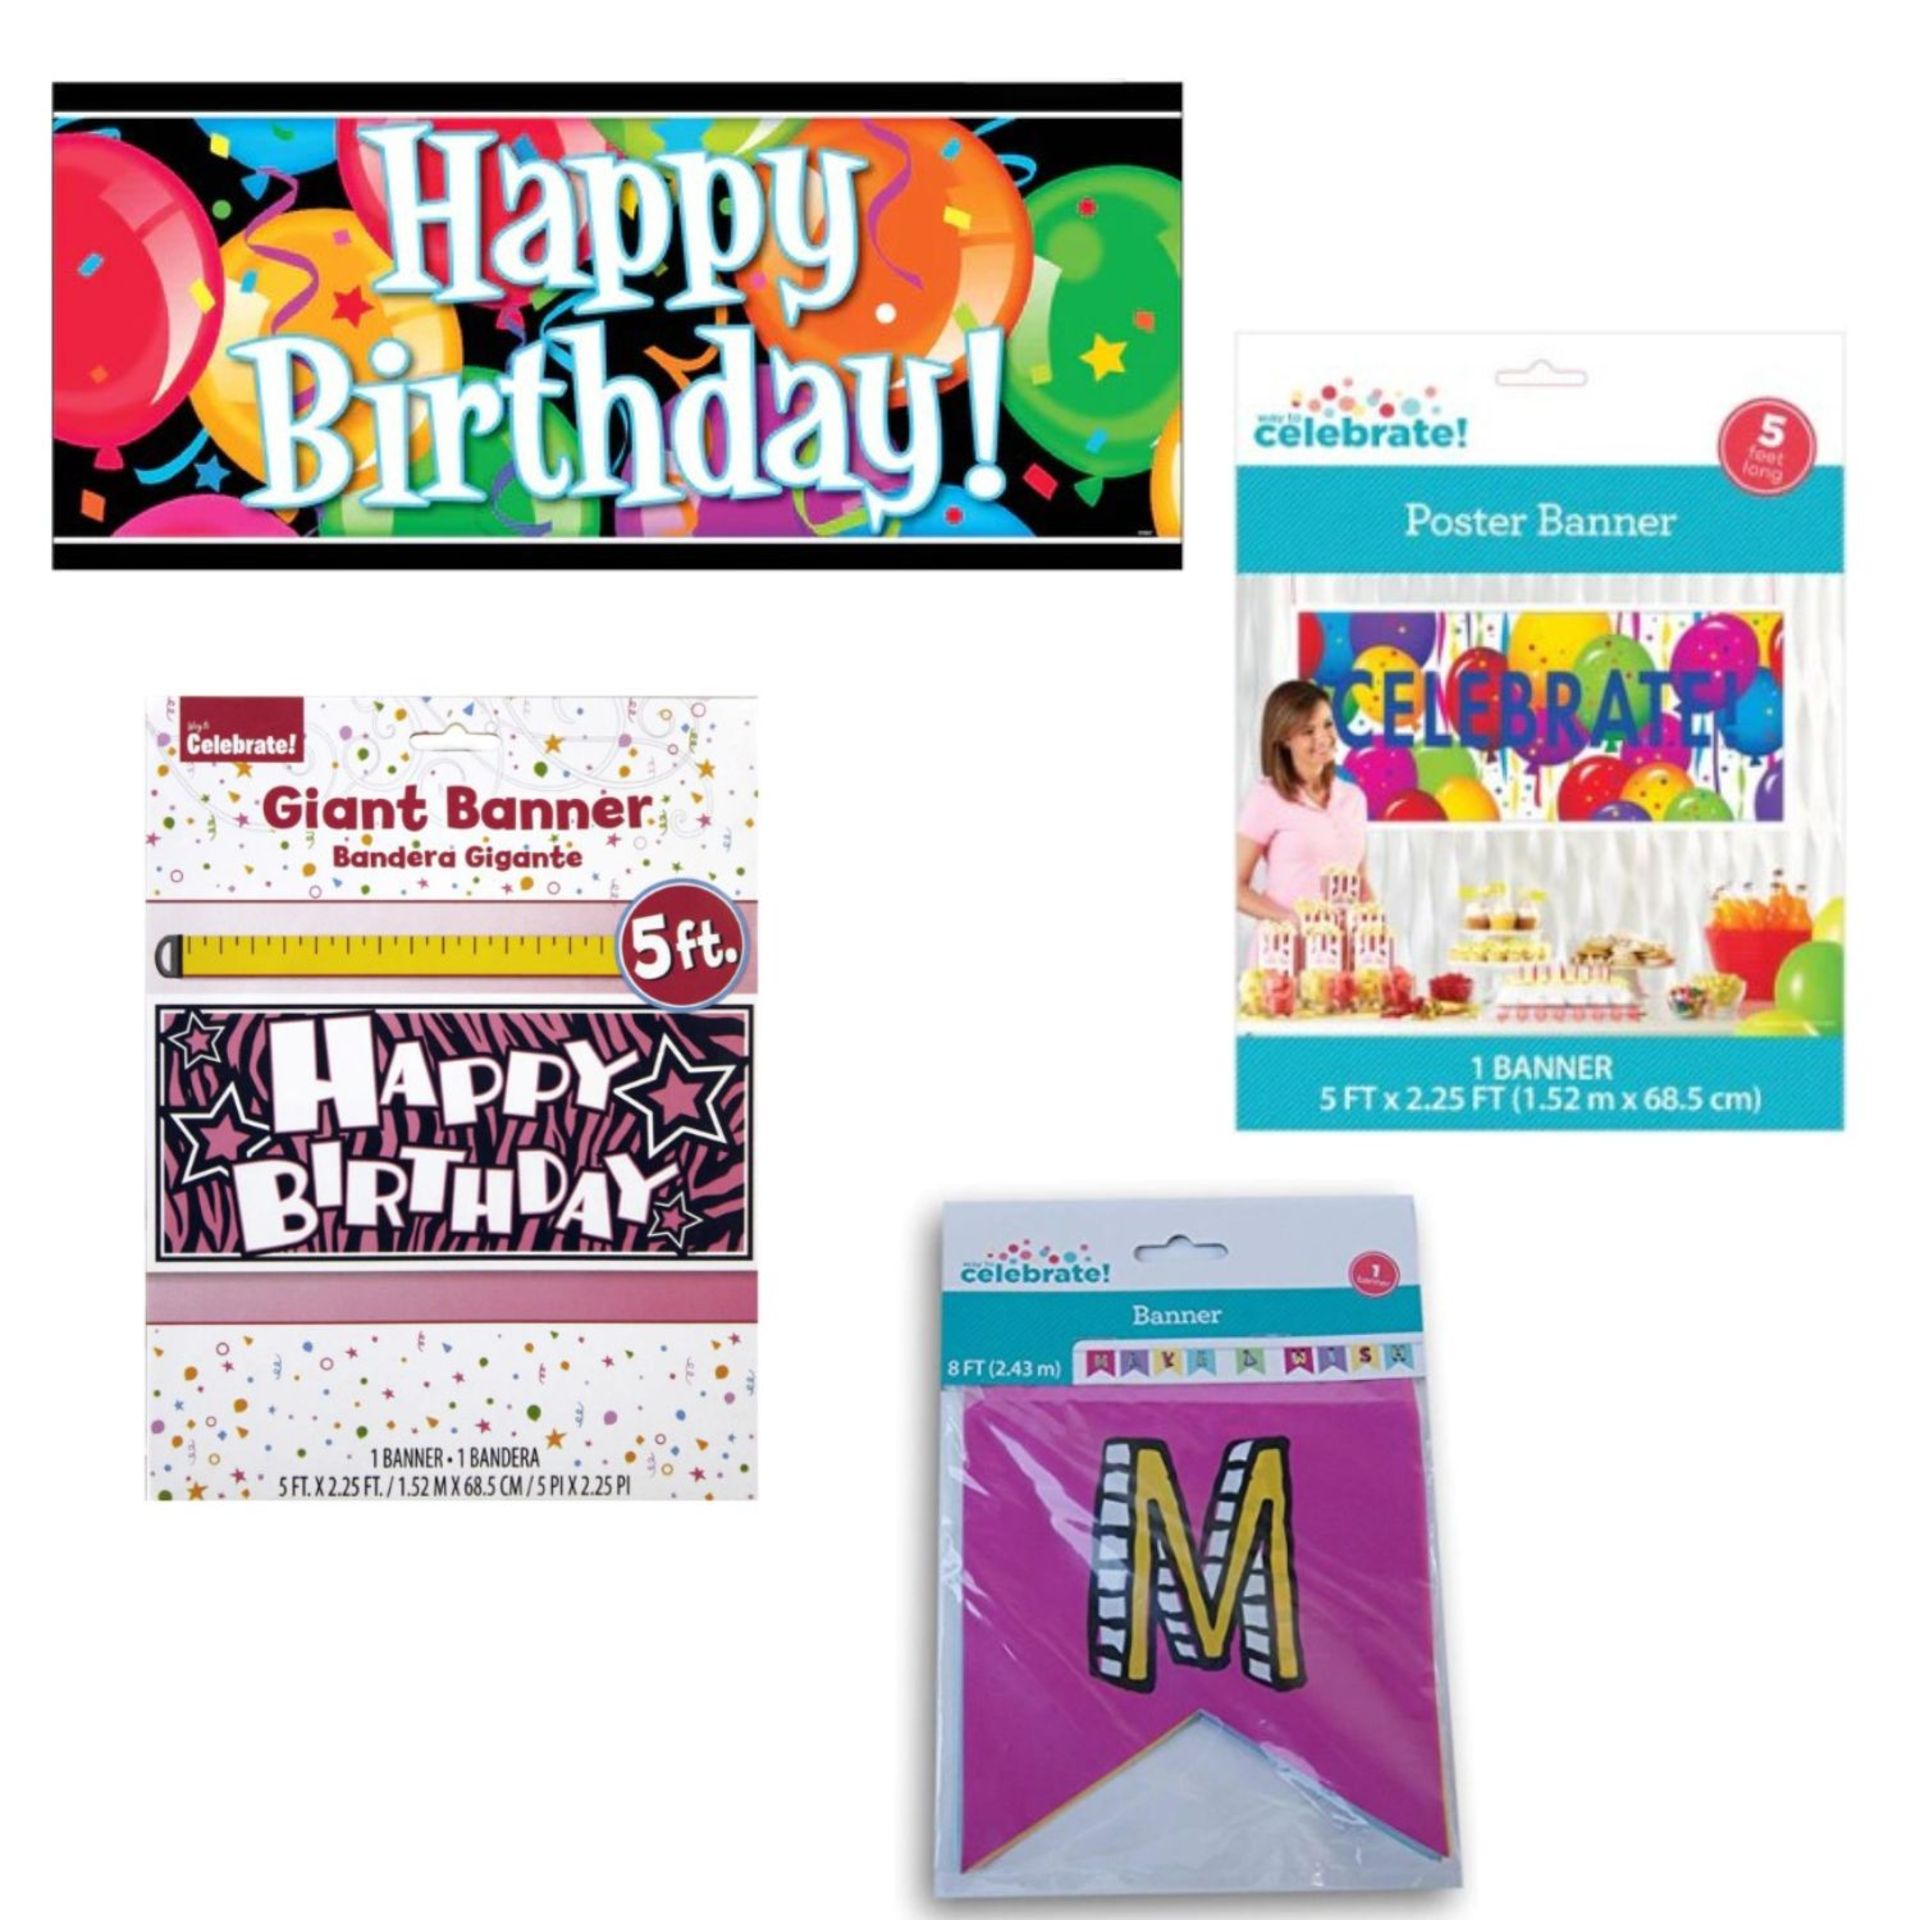 SURPRISE BOX OF 10,000 PARTY ITEMS INCLUDING BANNERS, LANTERNS, FLUTTER BALLS AND GARLANDS - Bild 7 aus 7